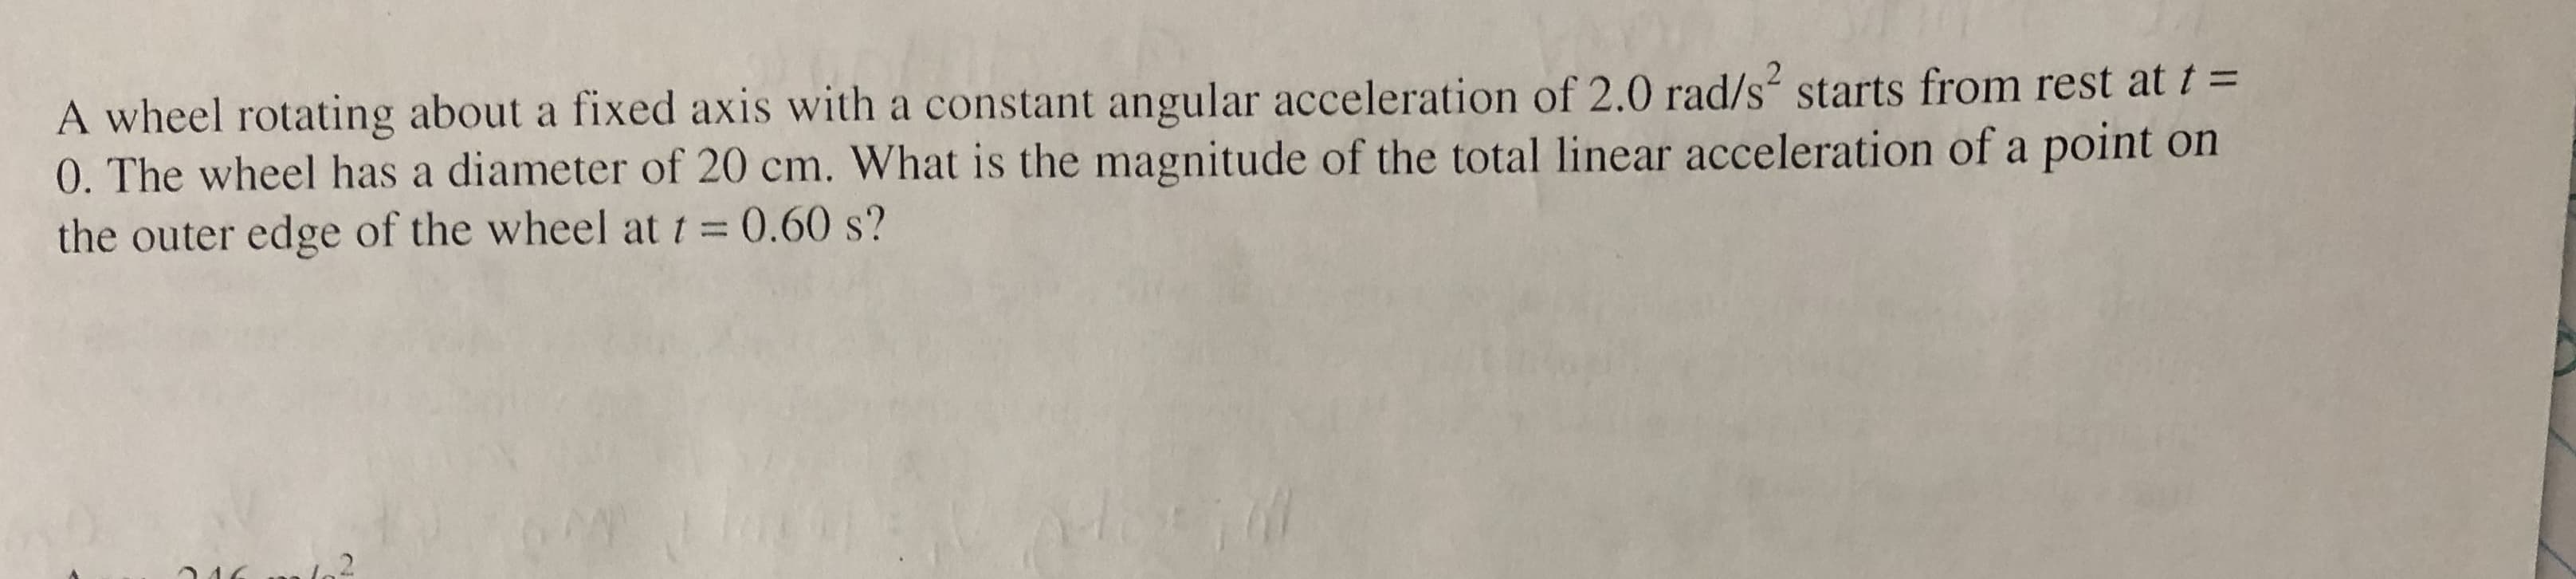 A wheel rotating about a fixed axis with a constant angular acceleration of 2.0 rad/s starts from rest at t =
0. The wheel has a diameter of 20 cm. What is the magnitude of the total linear acceleration of a point on
the outer edge of the wheel at t = 0.60 s?
